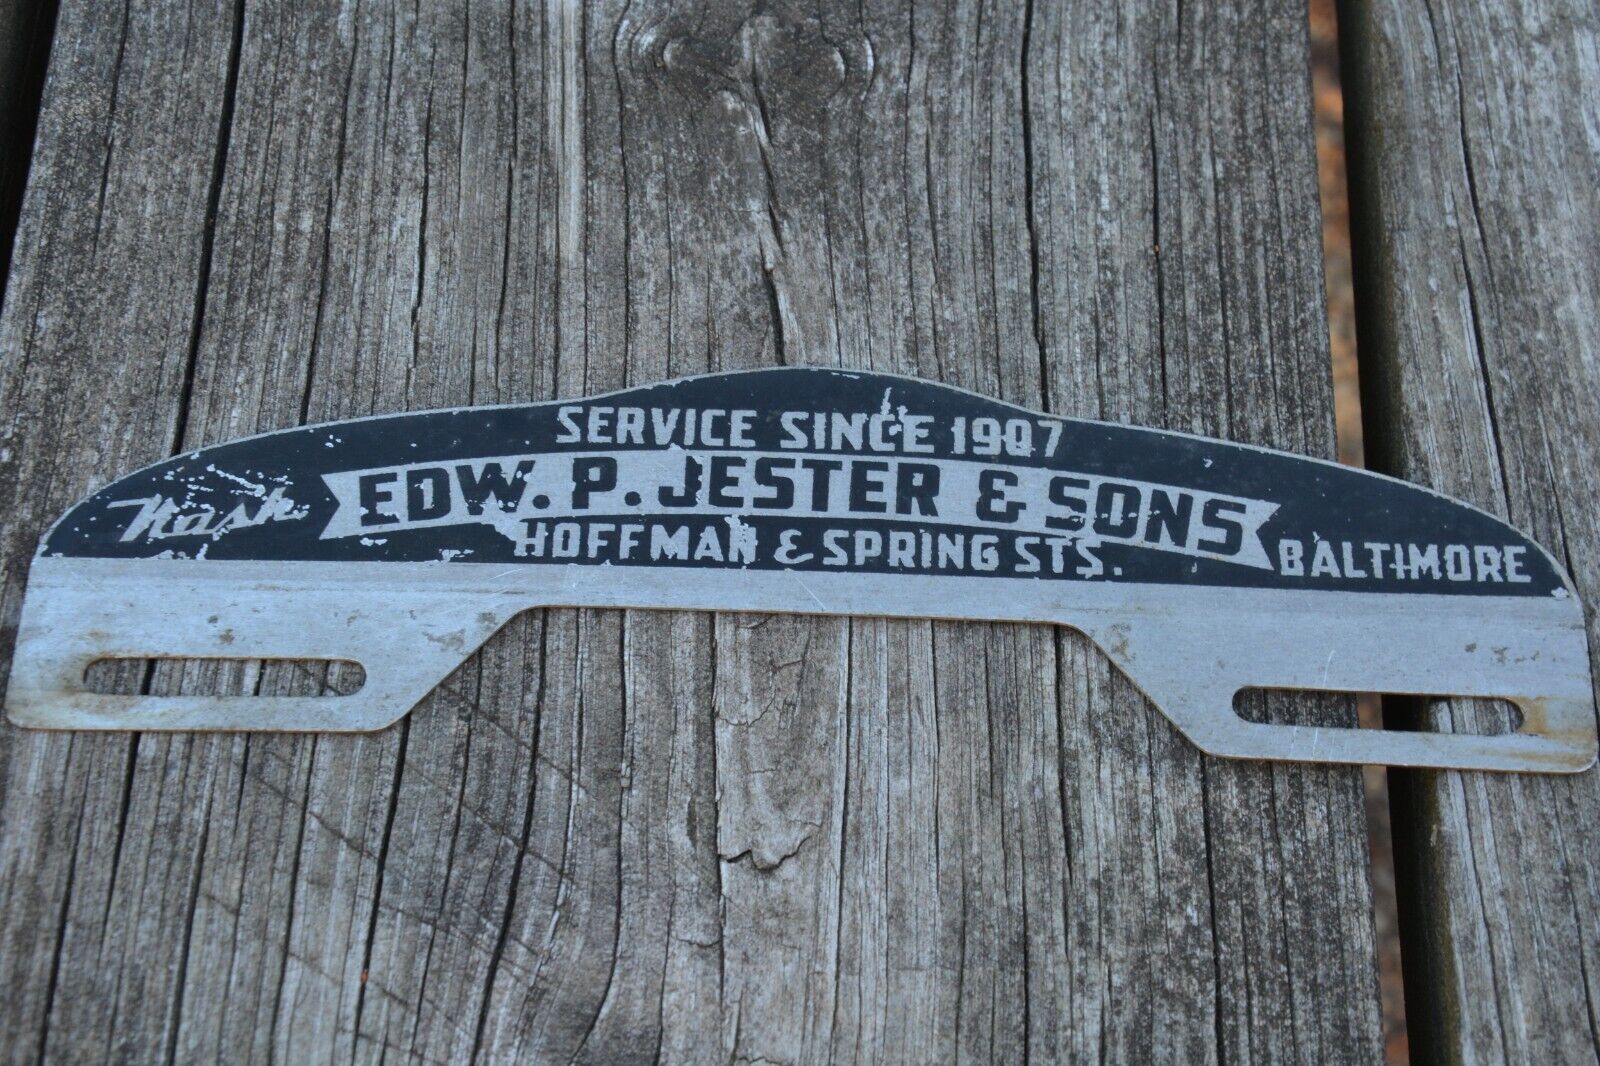 1930's NASH EDW. P JESTER & SONS SINCE 1907 BALTIMORE MARYLAND METAL TOPPER SIGN